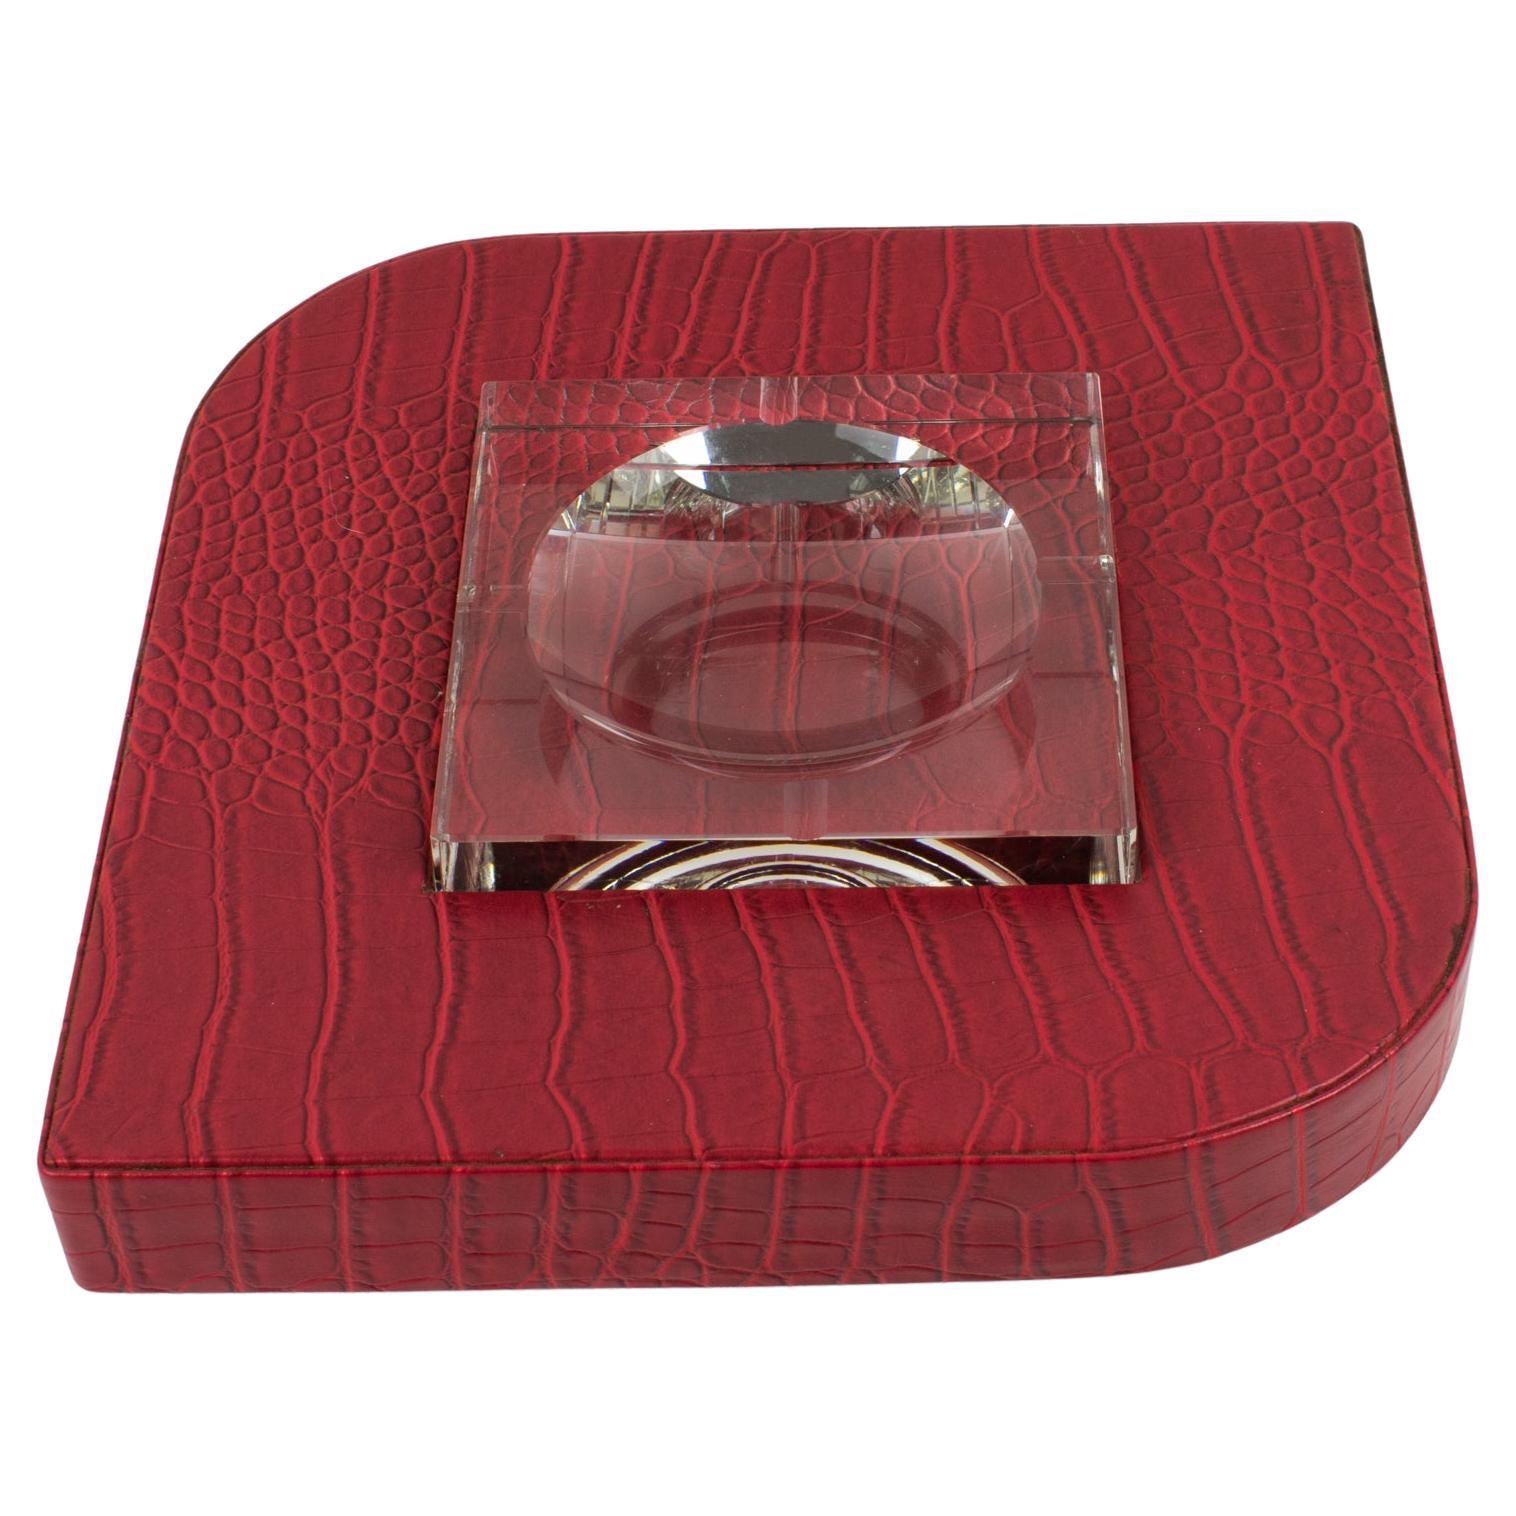 Dupre Lafon Style Red Leather and Crystal Cigar Ashtray Catchall Vide Poche For Sale